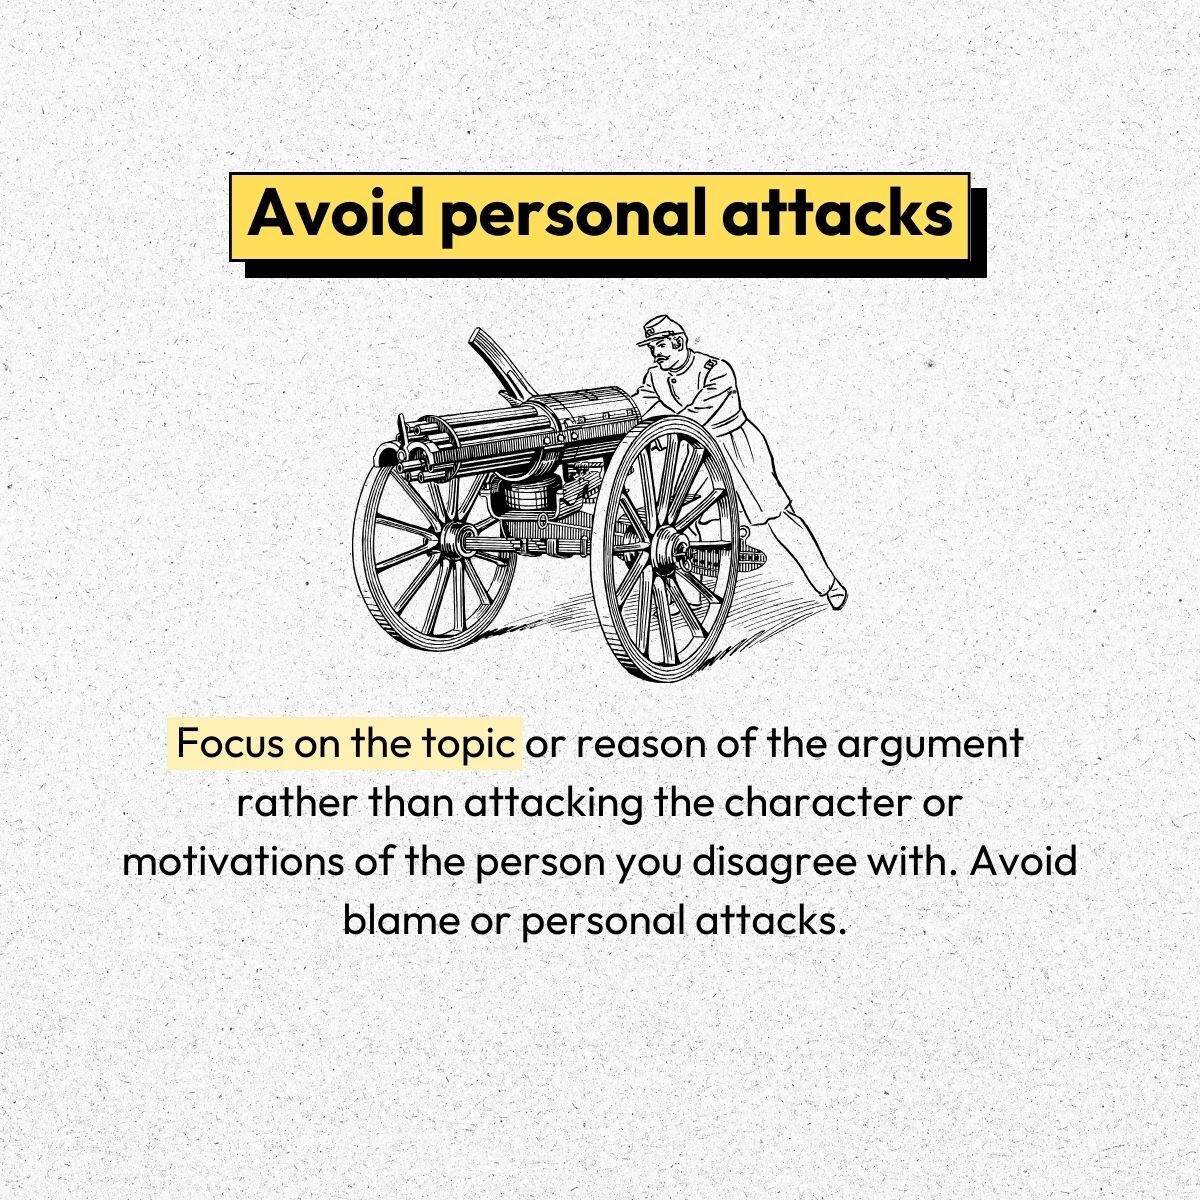 Avoid personal attacks when you disagree with someone